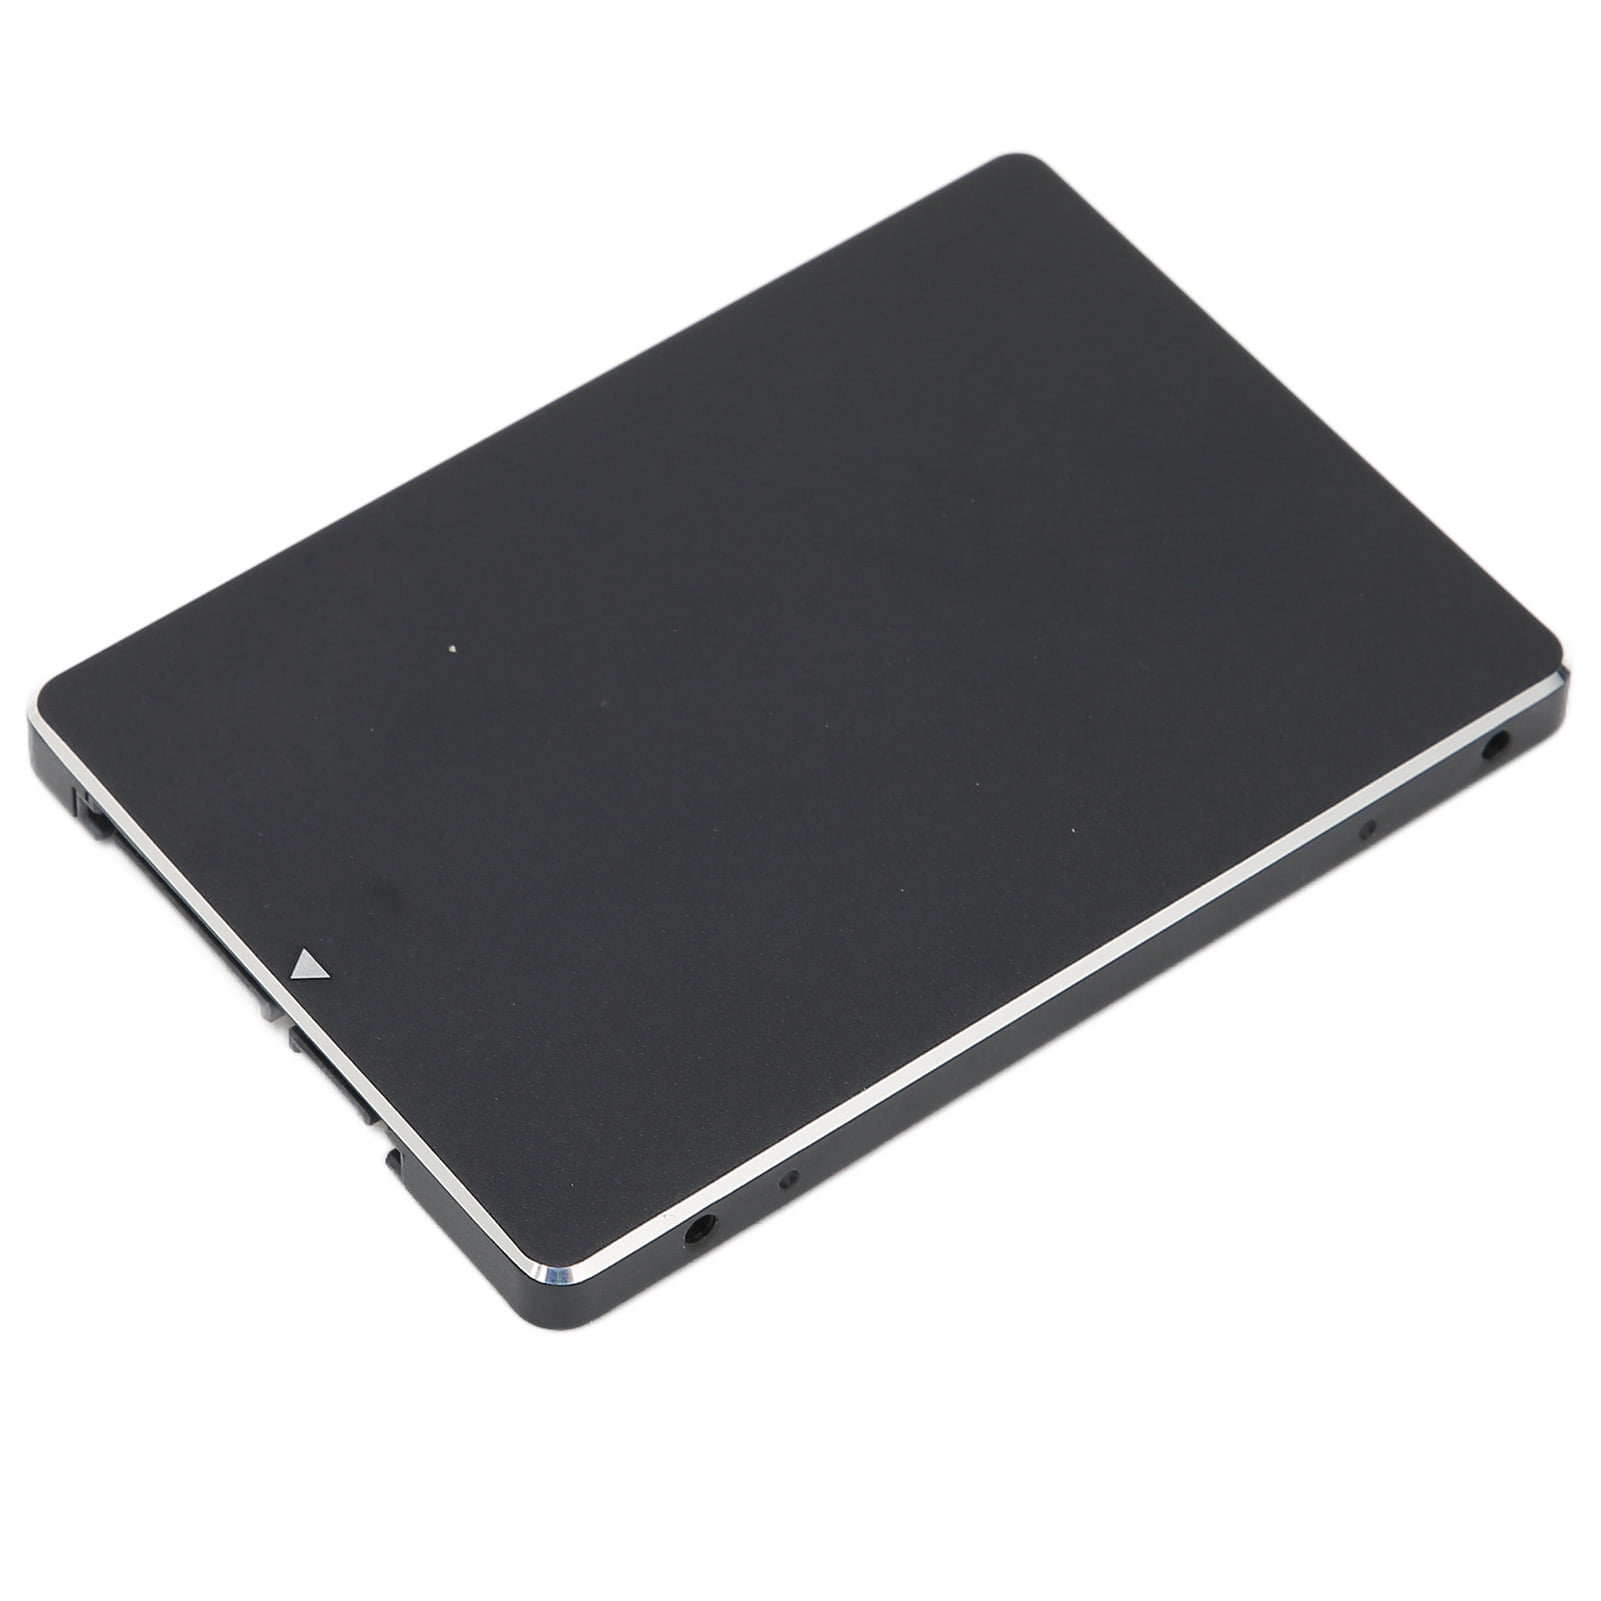 SSD, Long Lasting Small Compact 2.5in SSD For Desktops For For Laptops Black 240GB - Walmart.com